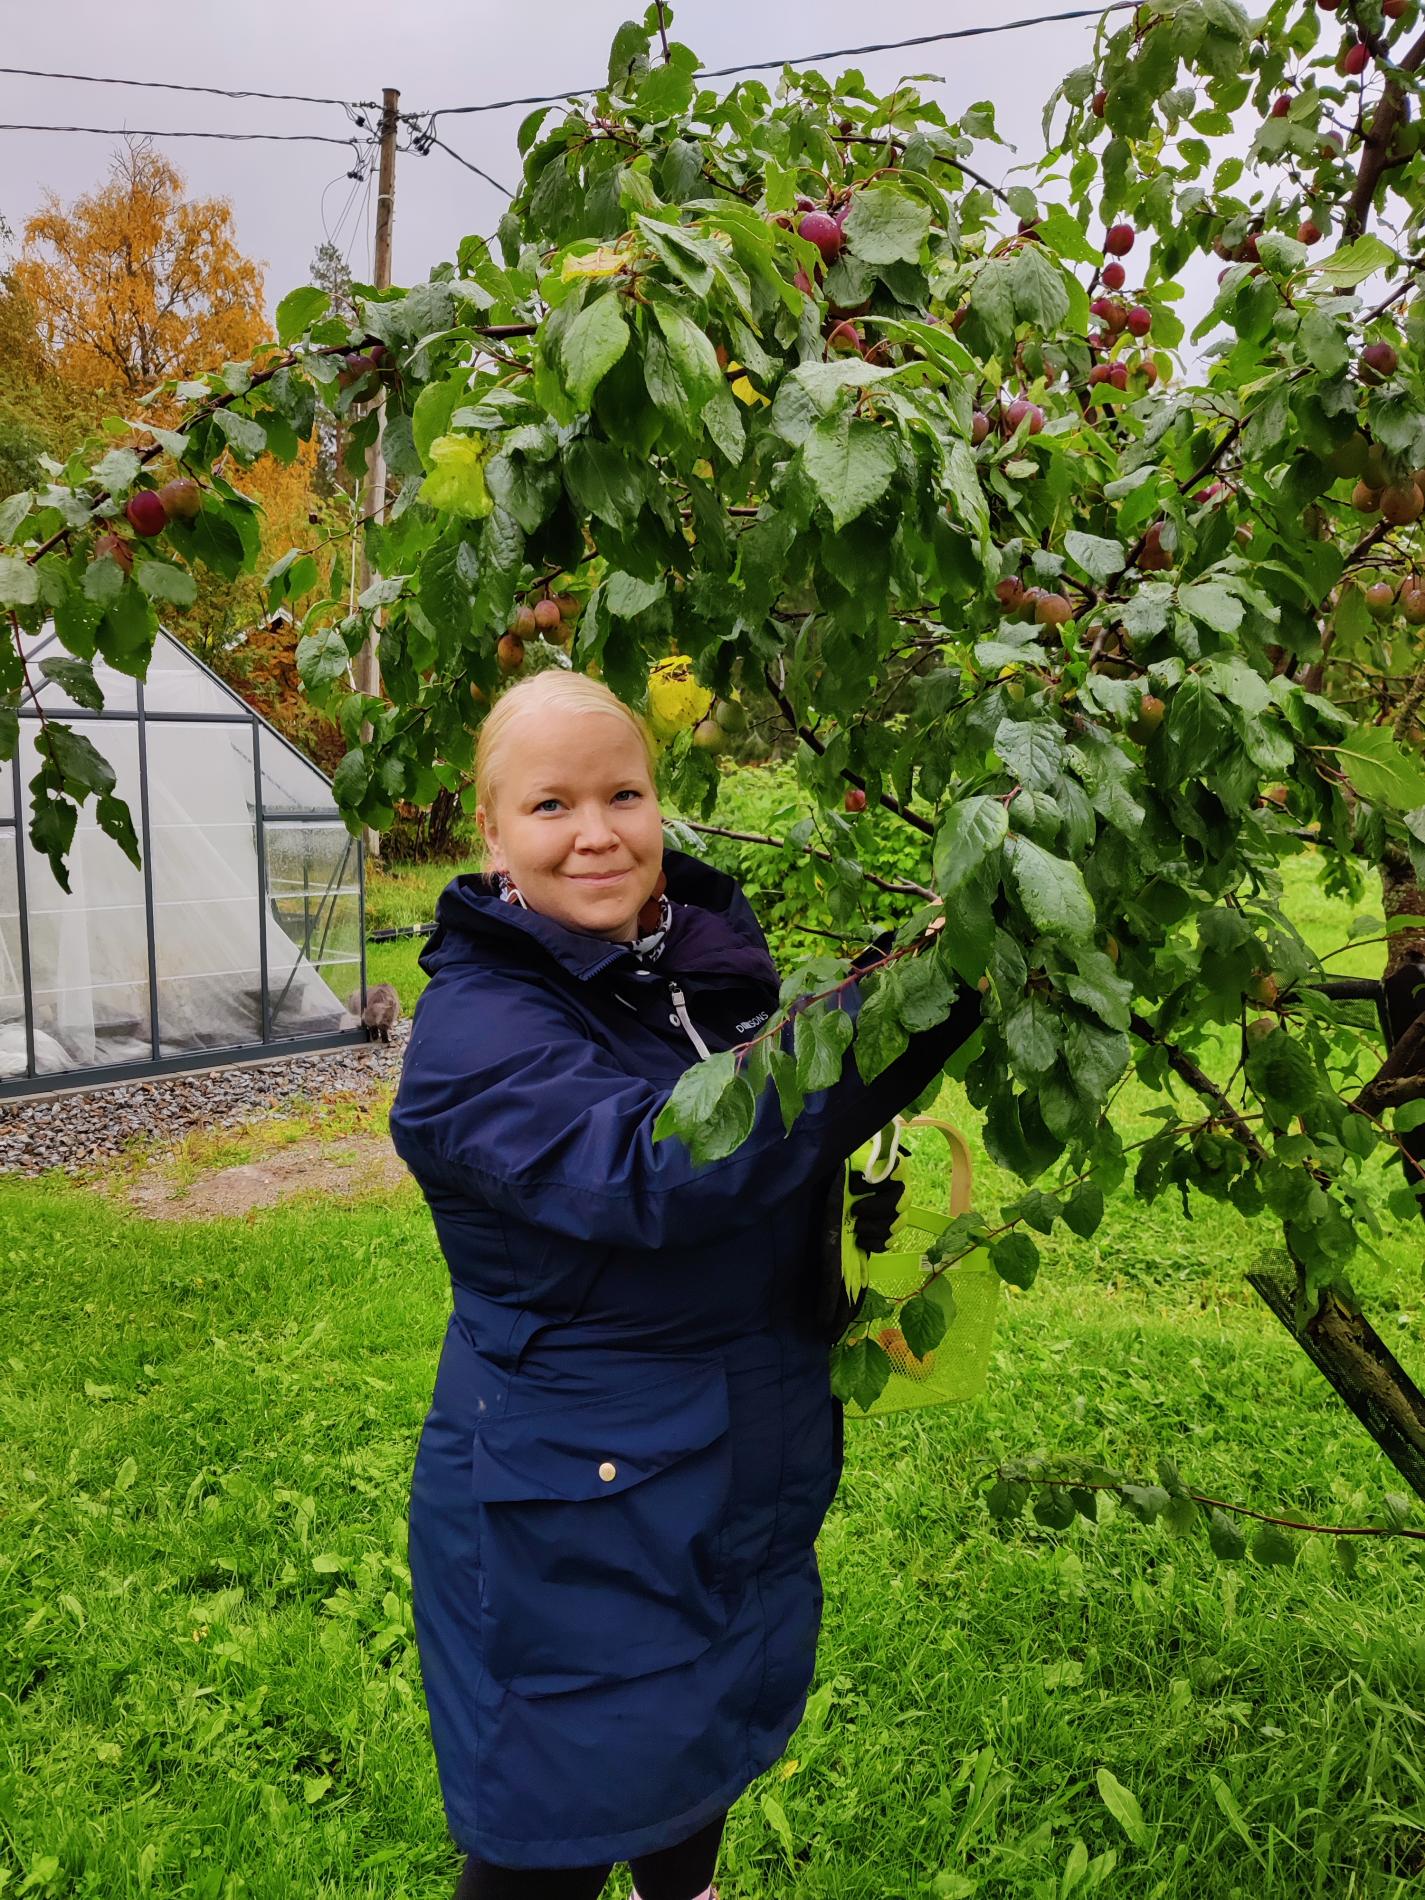 Elina collecting plums in her home garden.